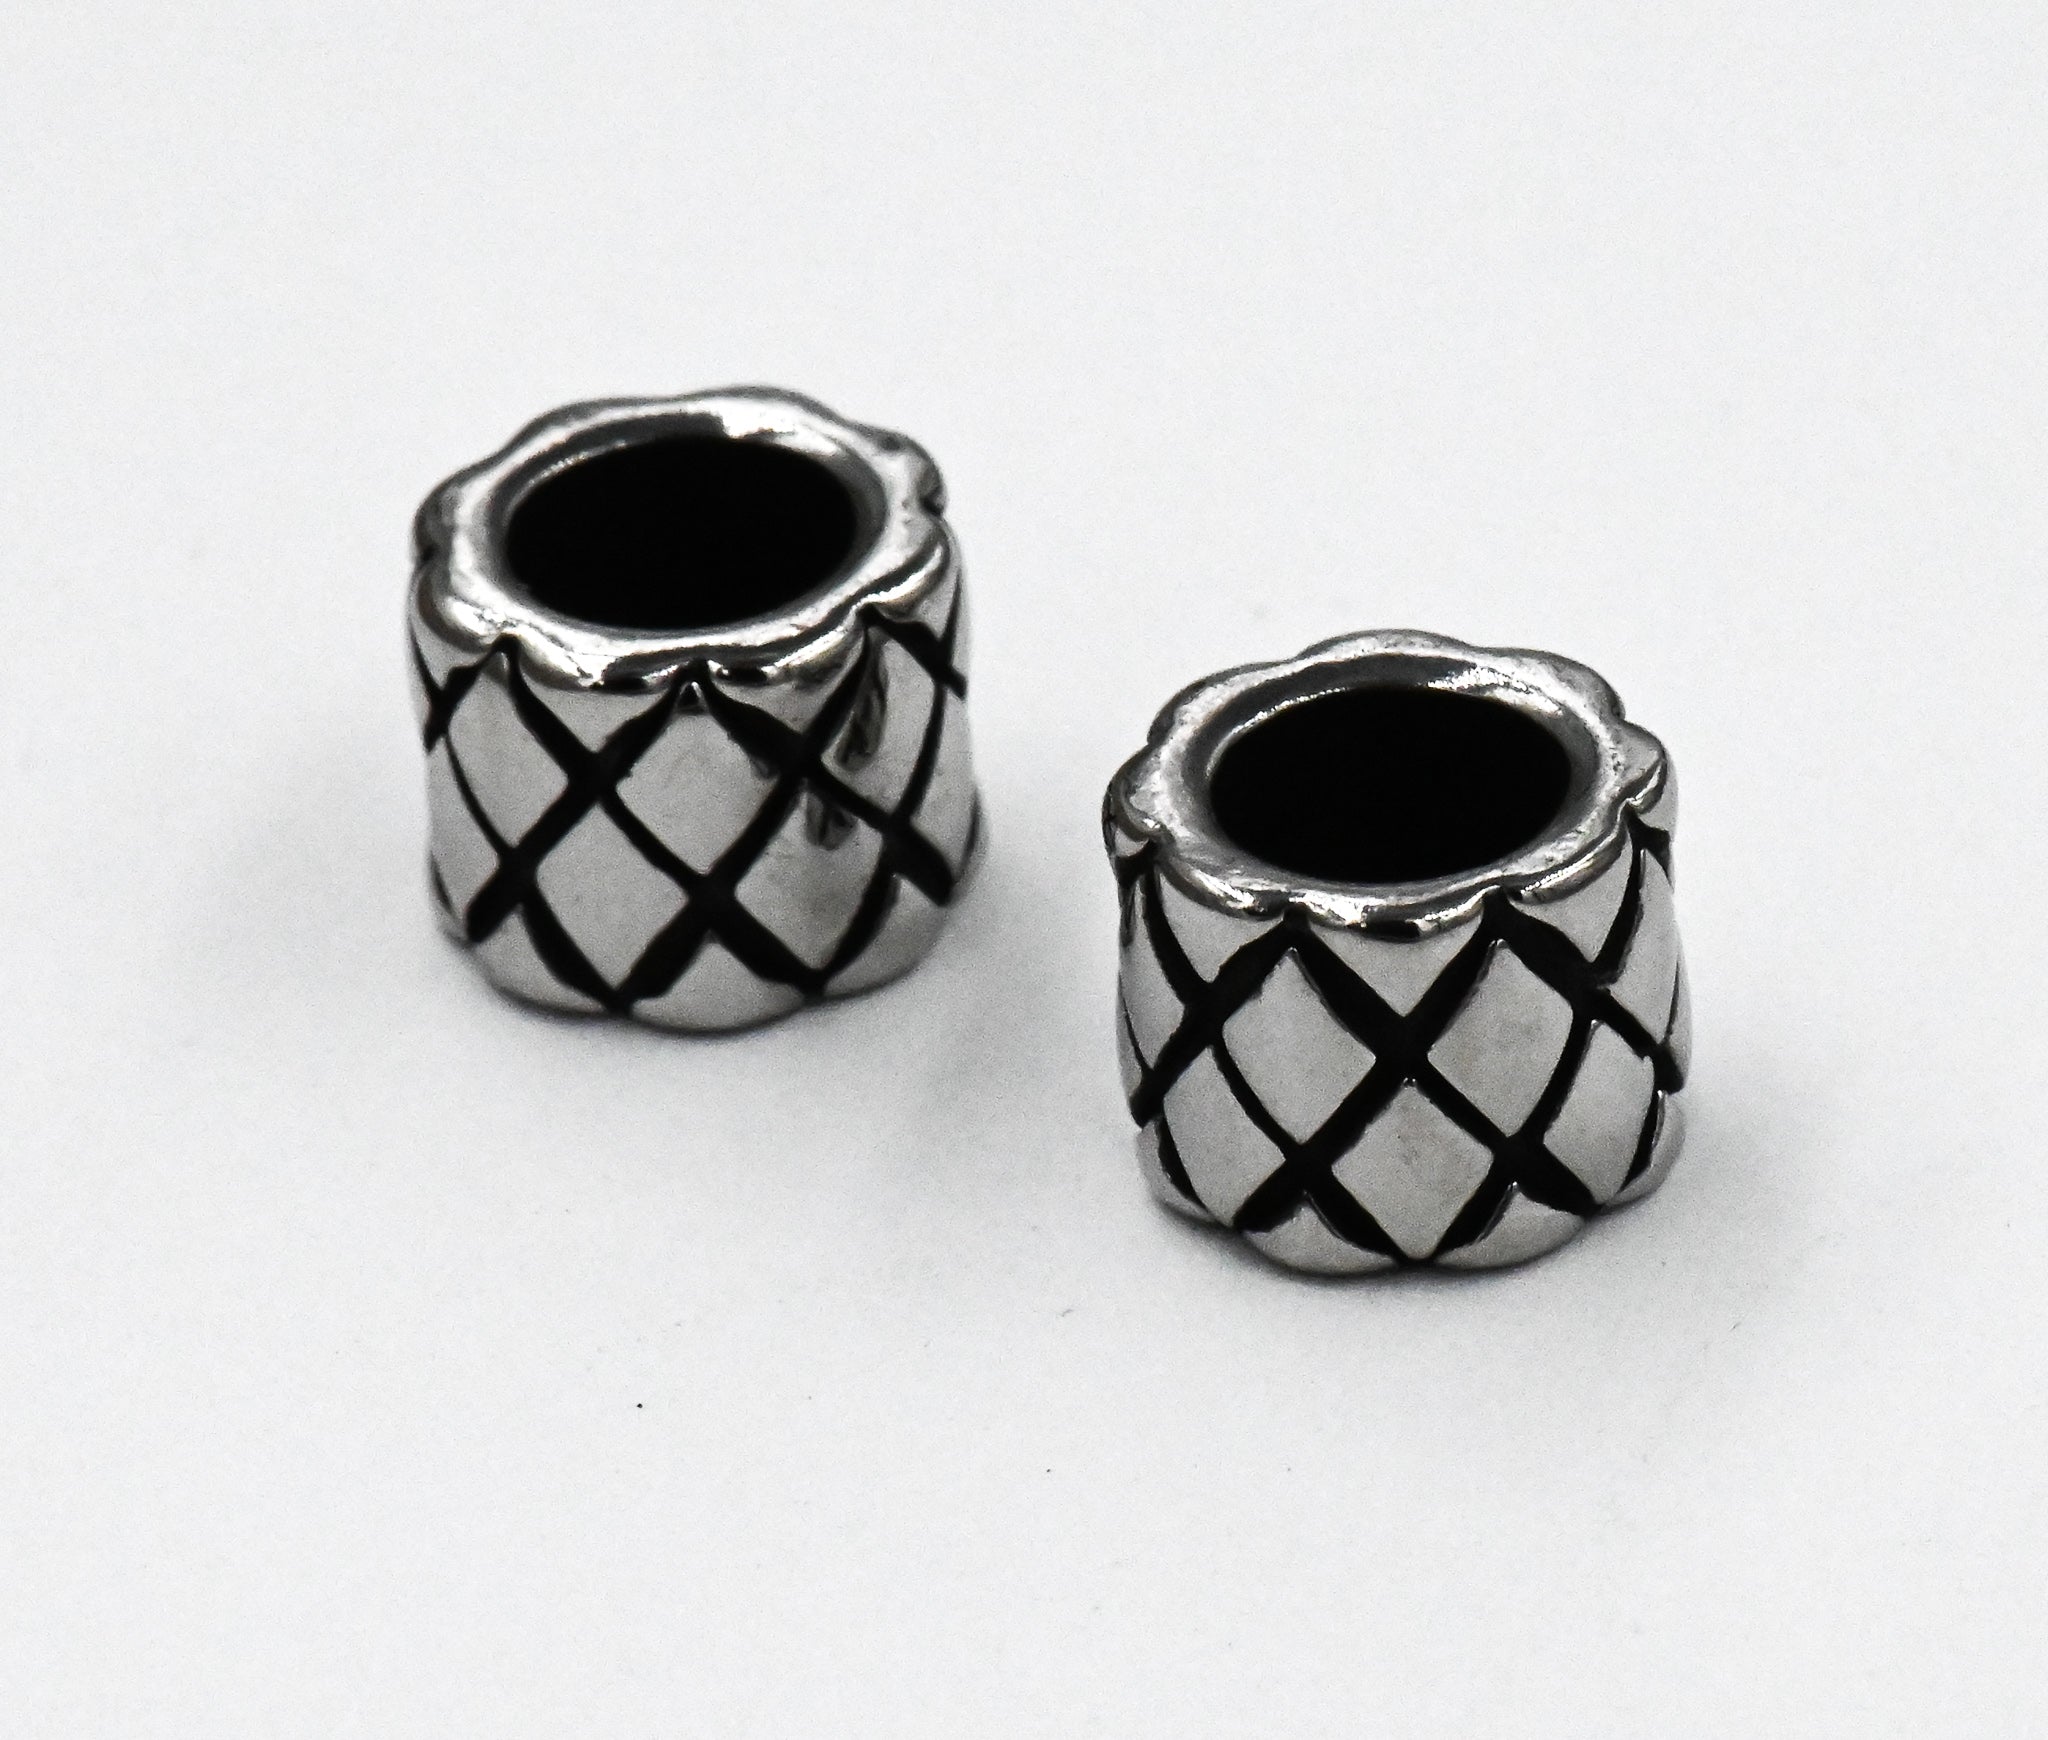 Stainless Steel Beads, Large Hole Beads, Column with Braided Pattern, Antique Silver, 9mm